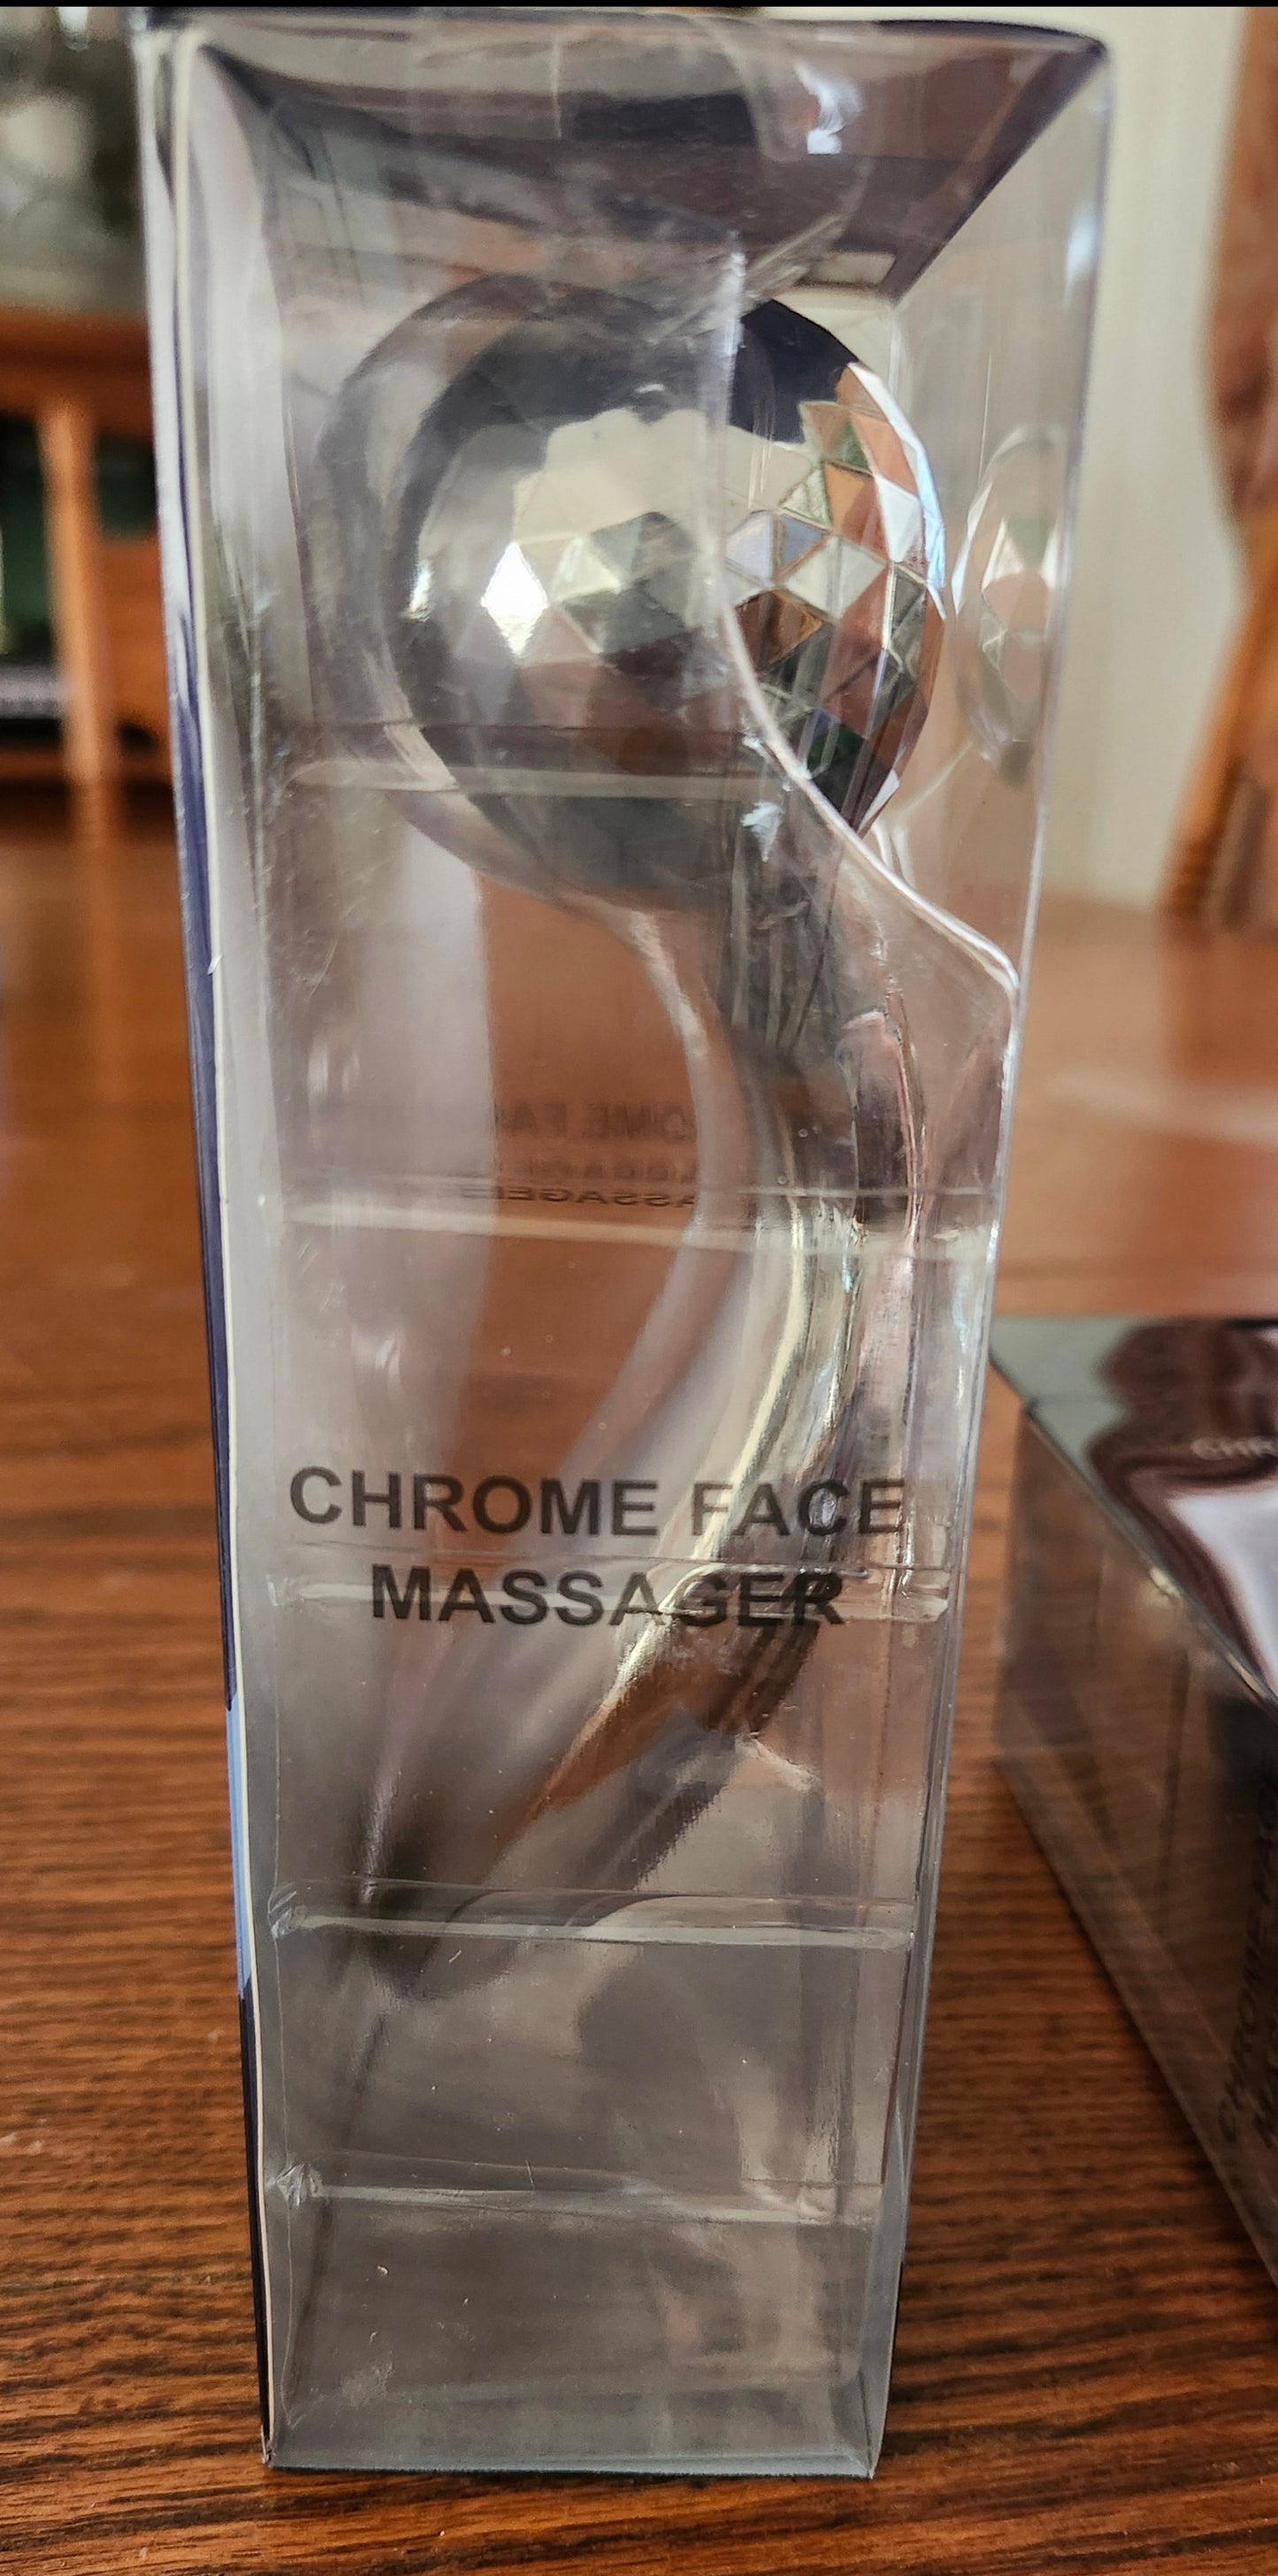 Chrome Face Massager With Double Rollers By Sky Maxx "New Arrival"